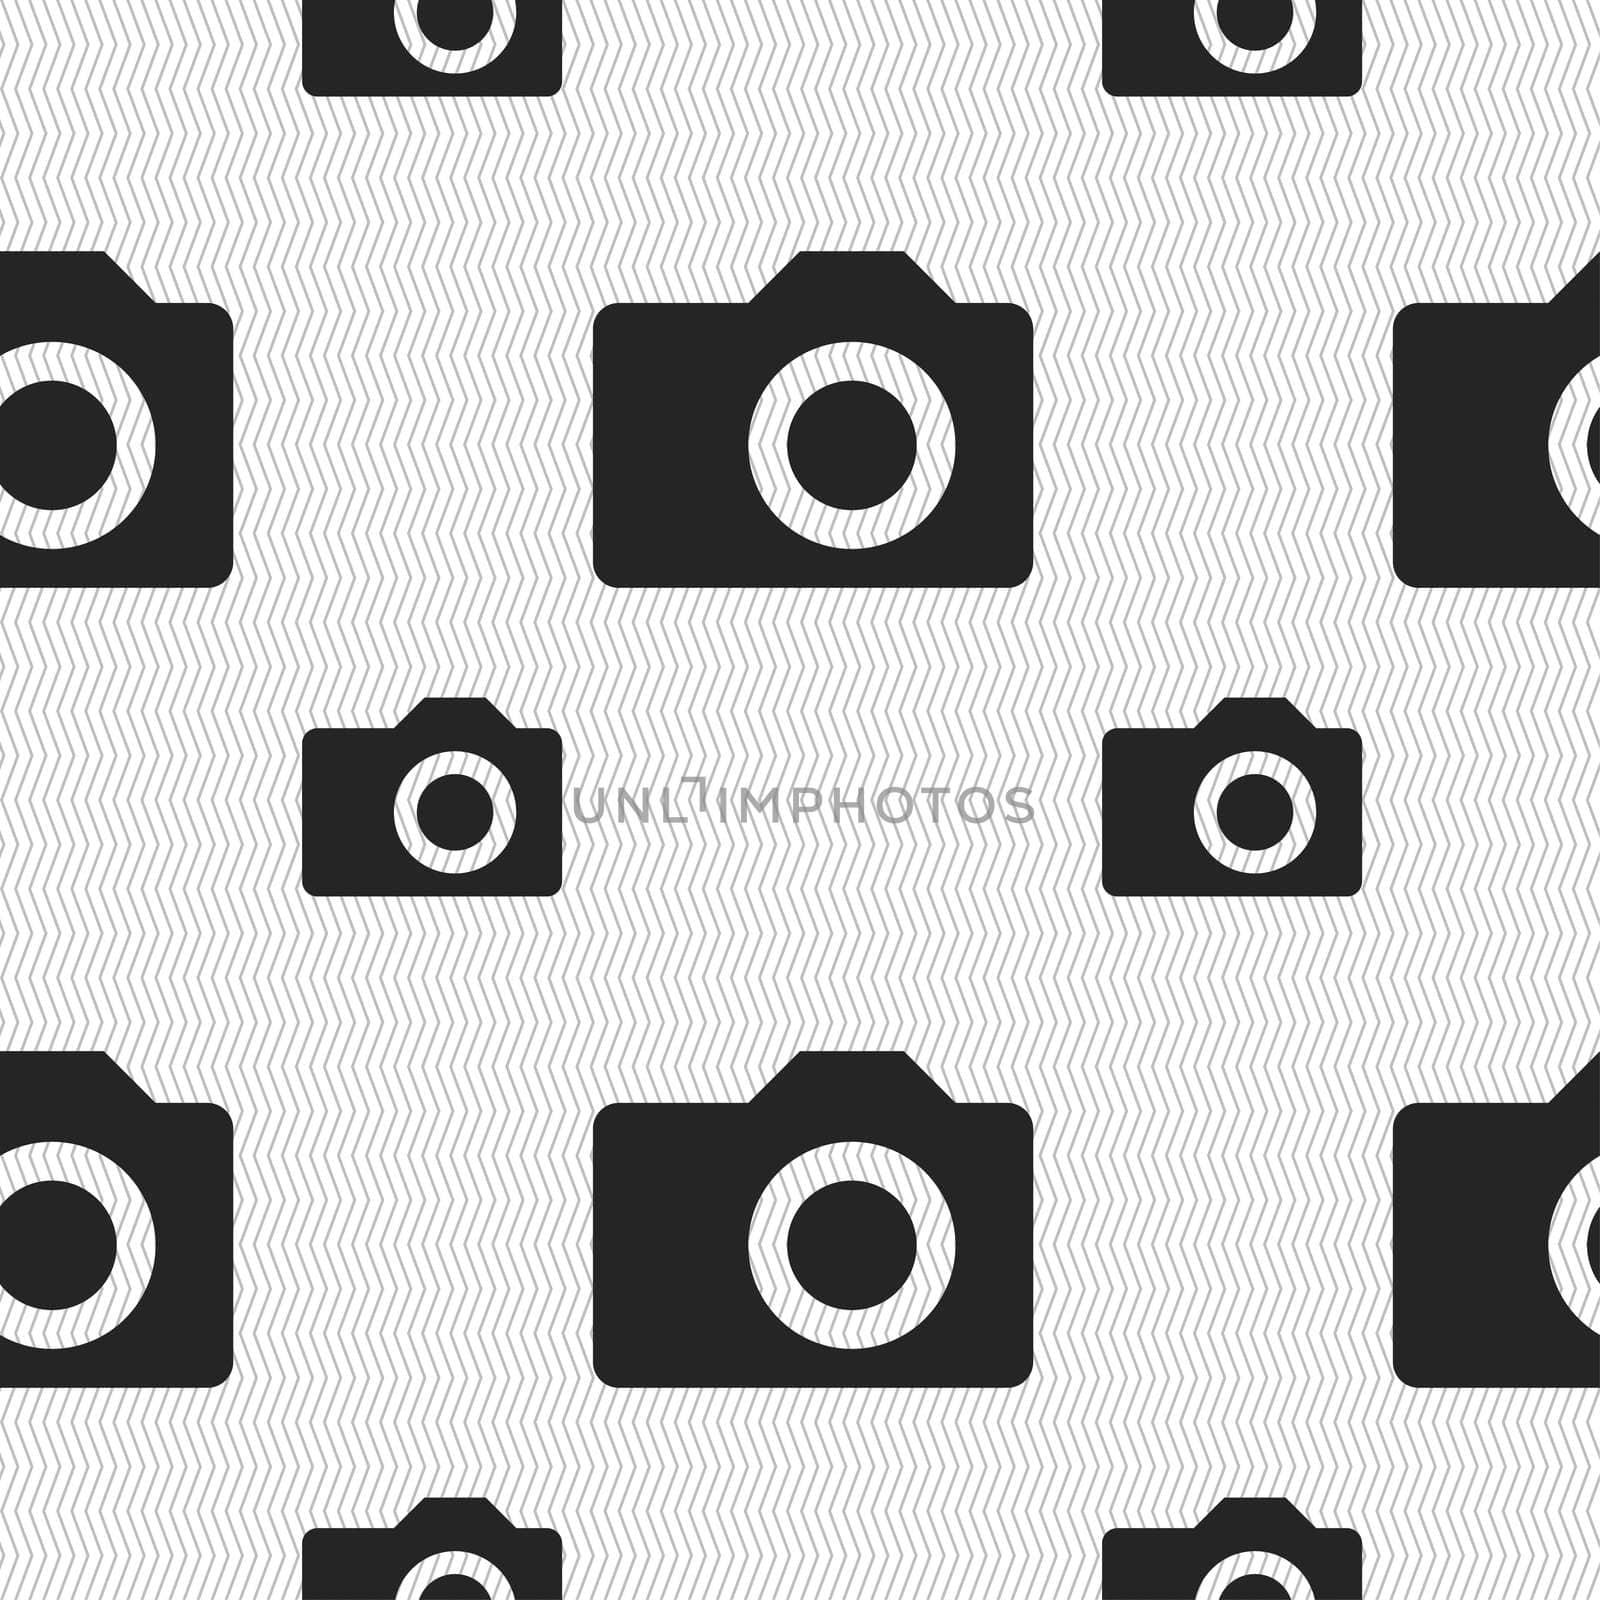 Digital photo camera icon sign. Seamless pattern with geometric texture. illustration